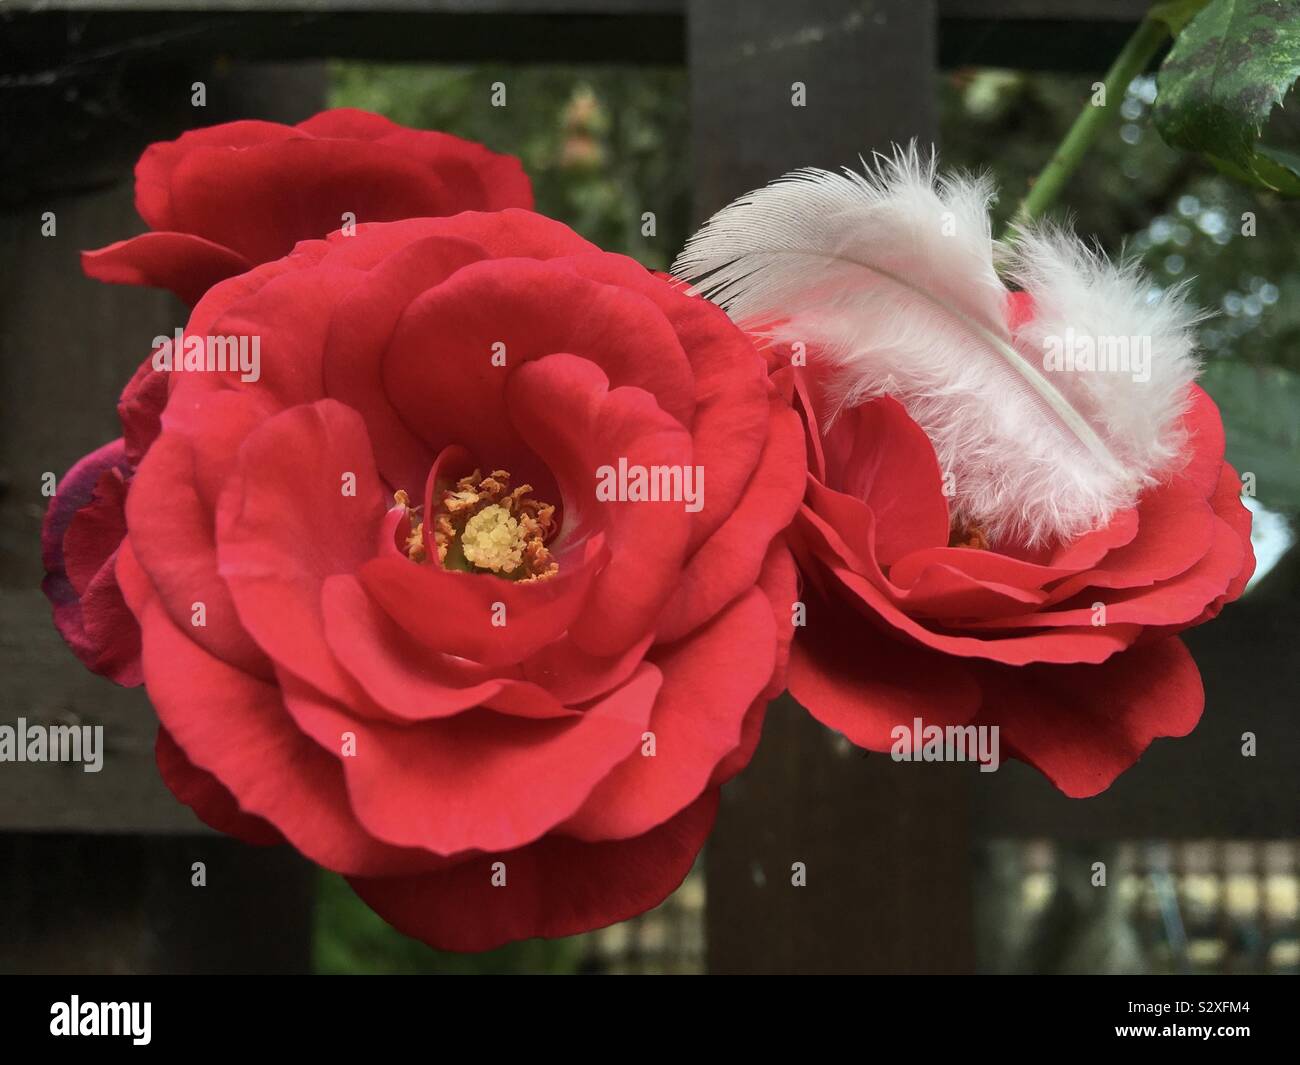 A white fluffy feather cusps in a red rose in our garden. Stock Photo